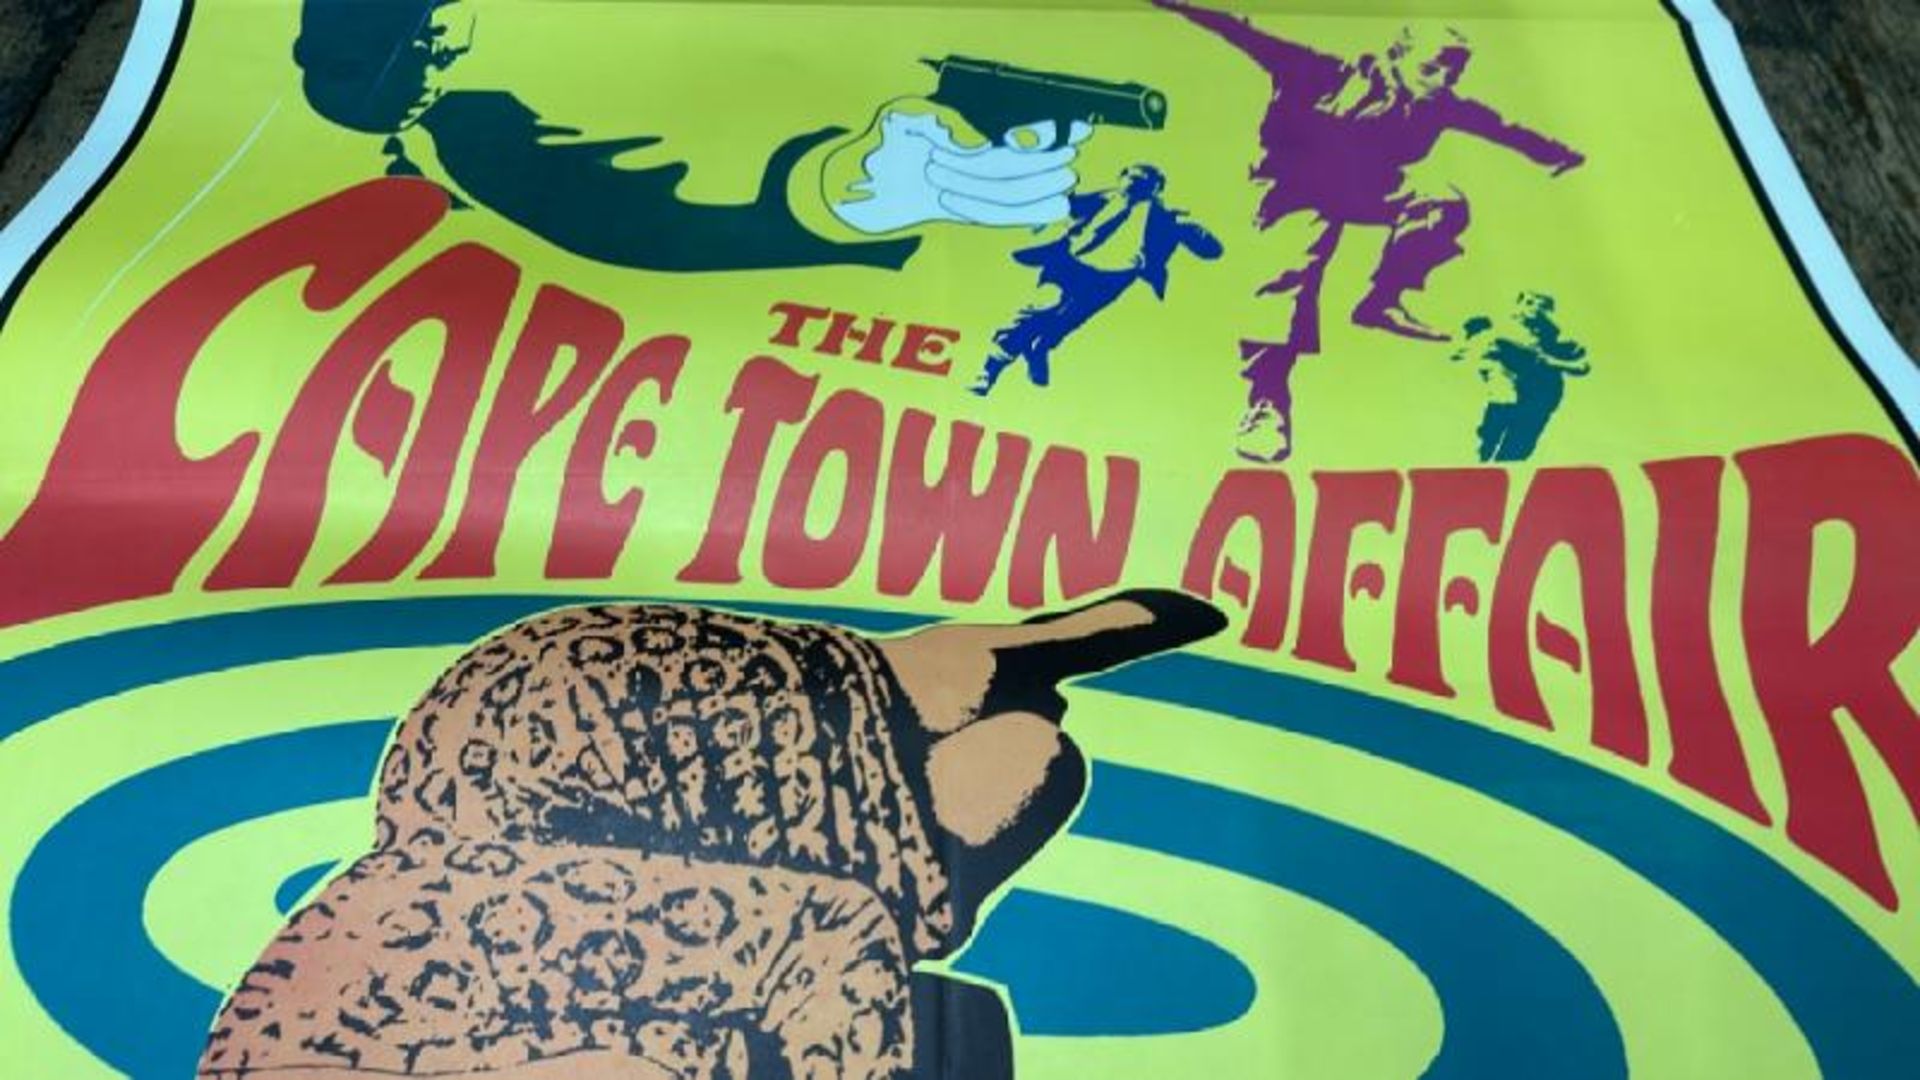 THE CAPE TOWN AFFAIR, ORIGINAL FILM POSTER, PRINTED IN THE USA, 69CM W X 104CM H - Image 3 of 4